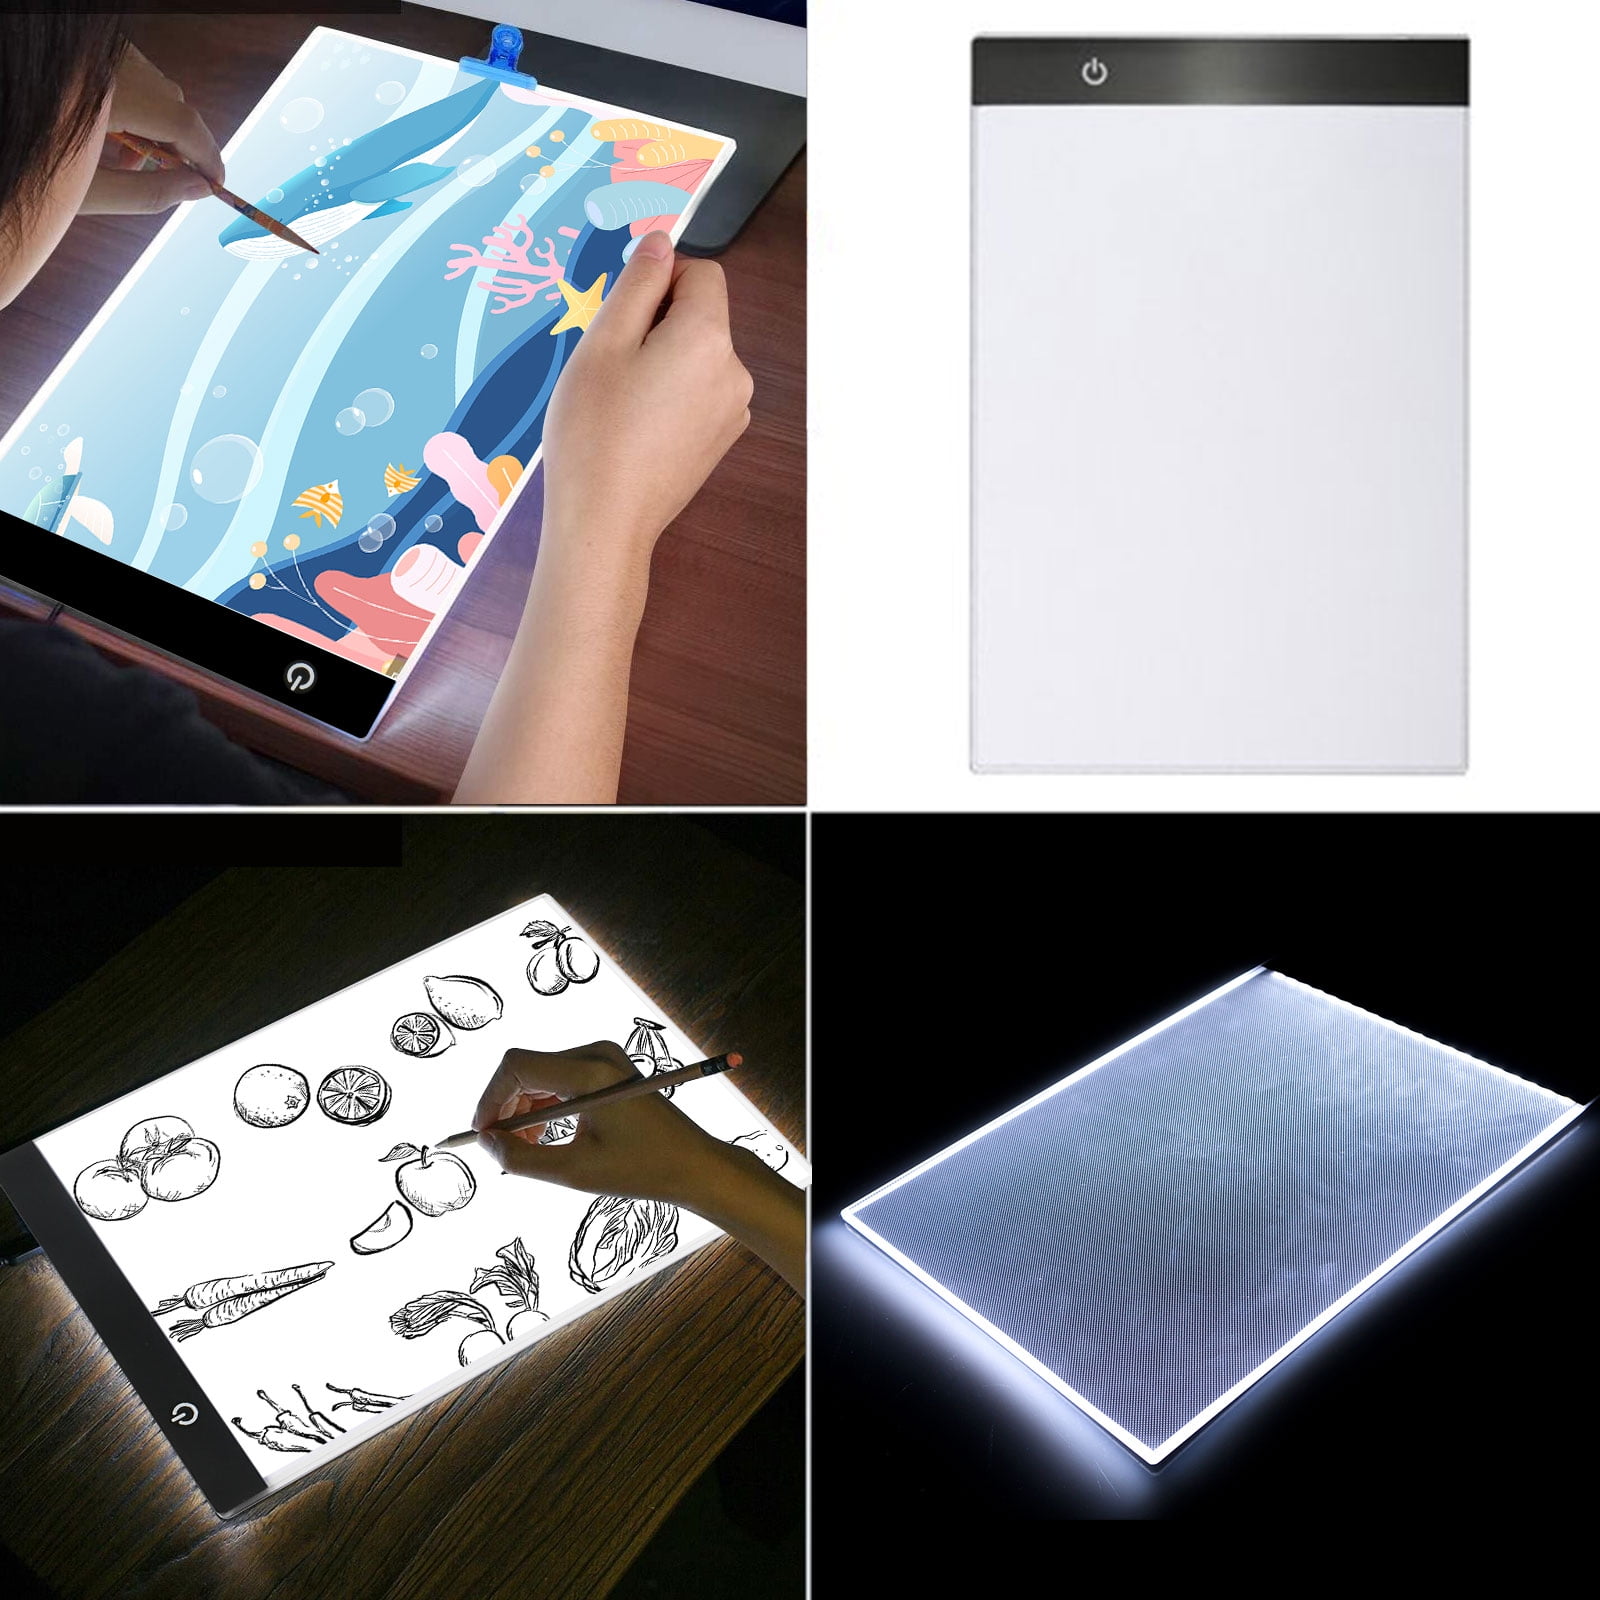 Yuelong Ultra-thin Portable A4 LED Light Pad,Tattoo Light Table Tracer USB Cable with Brightness Adjustable Animation,X-ray Viewing,Tattoo Transferring Used for Artists,Drawing Tracing Light Box 